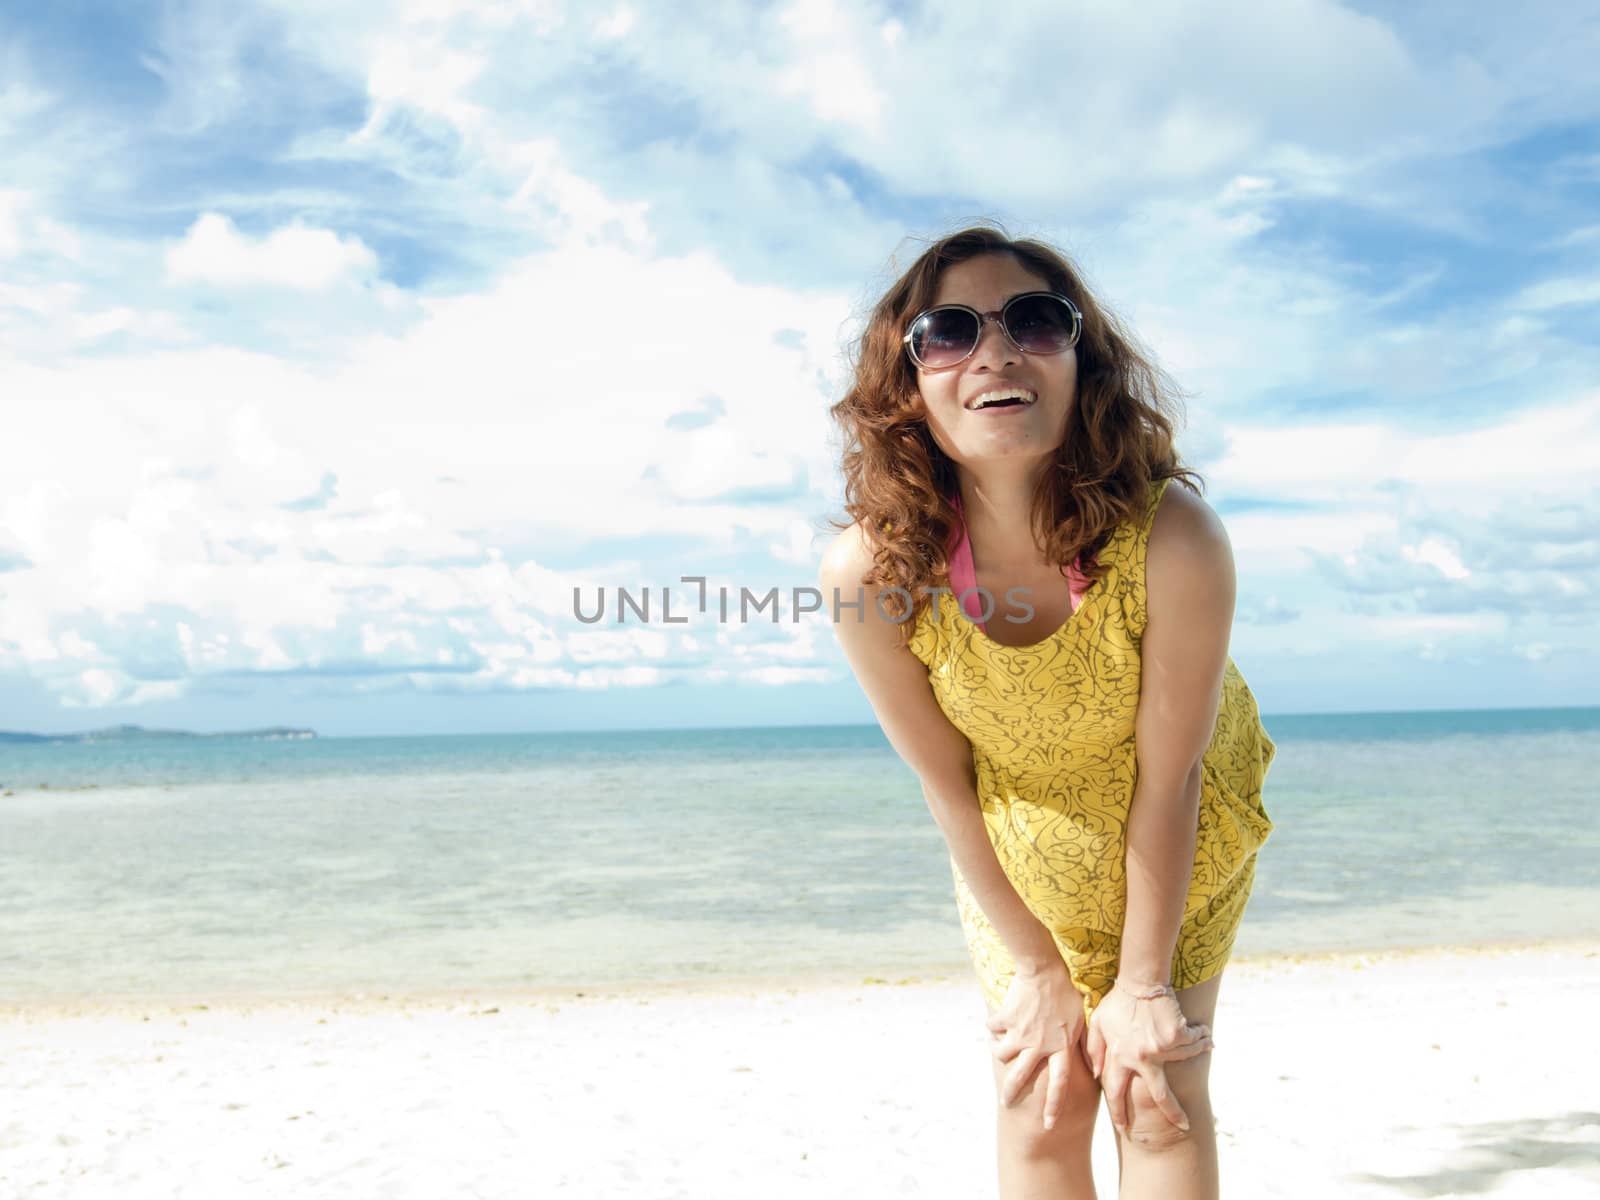 Asian Women happy on the Beach with vibrant yellow dress by jakgree